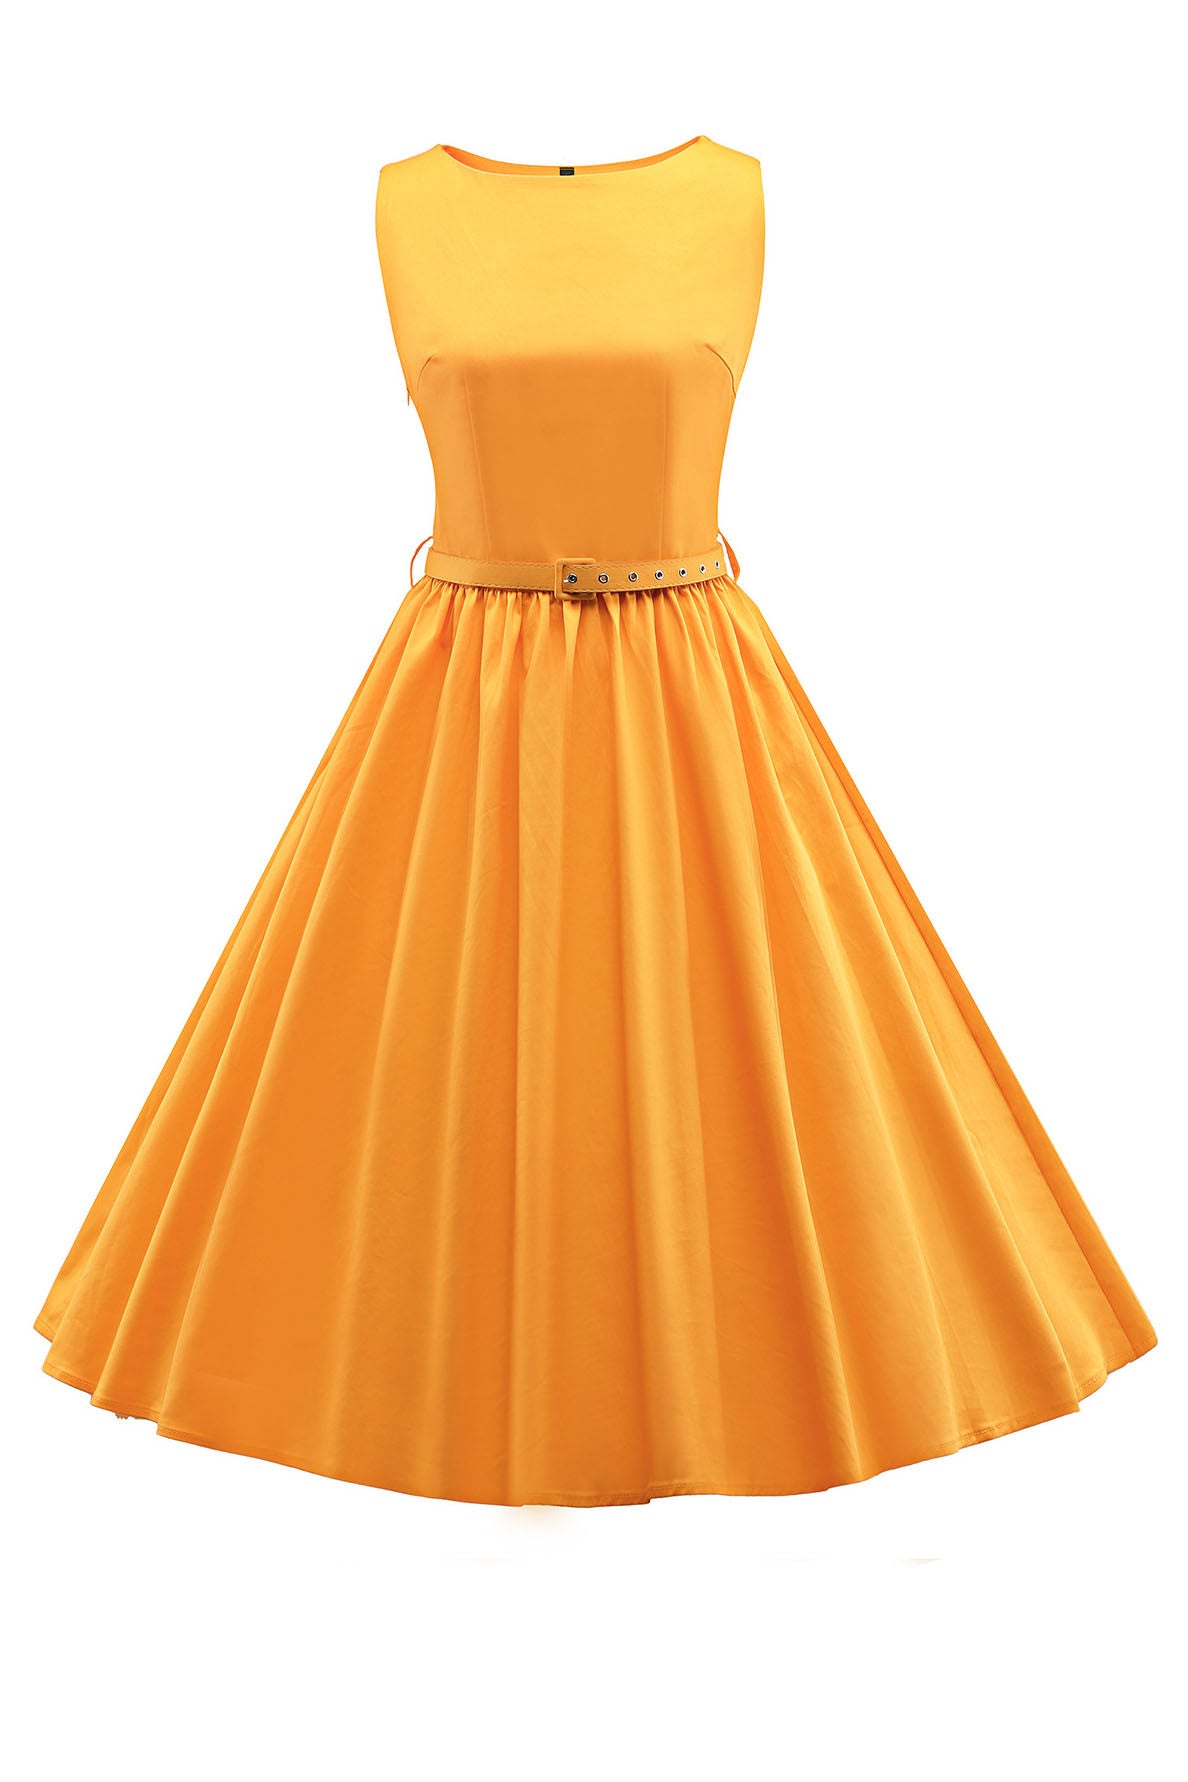 Pure Color Lovely Scoop Sleeveless Pleatered Knee-length Dress